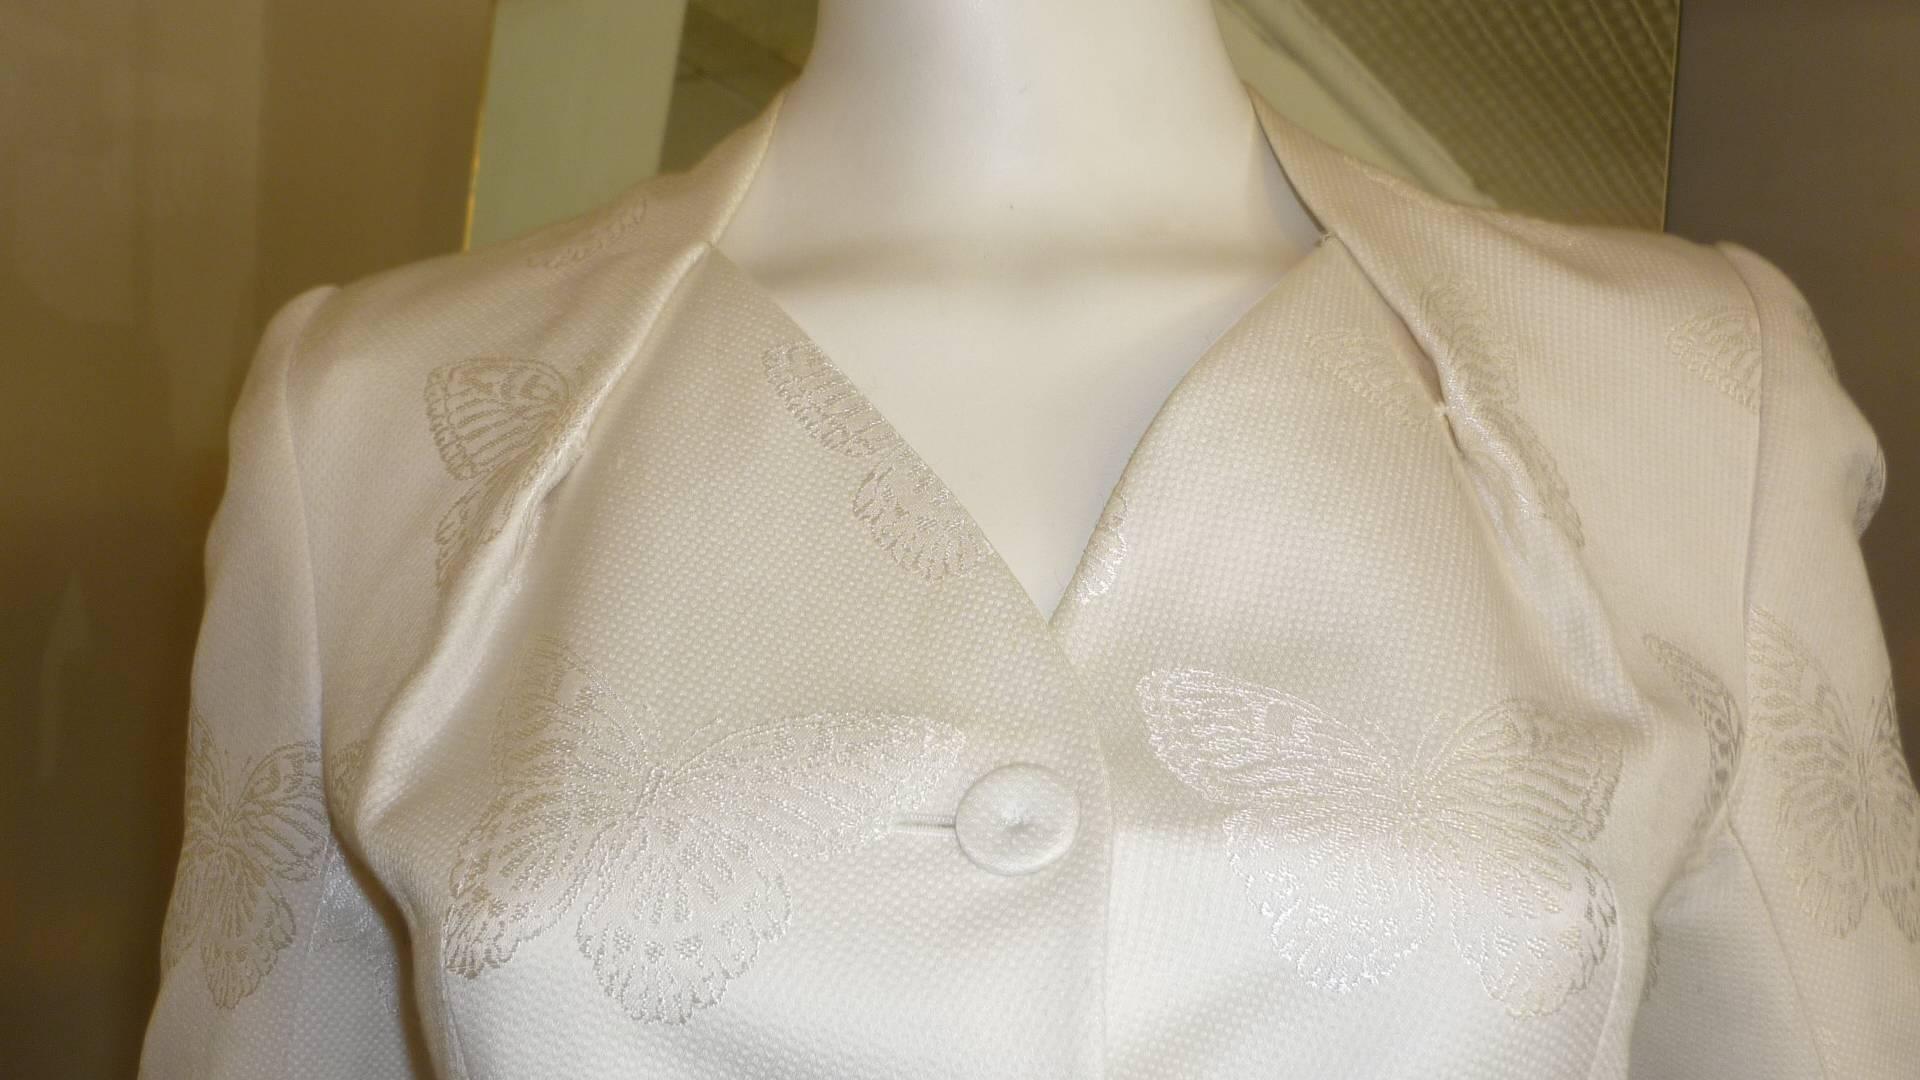 Such a lovely suit in ivory cotton 67% viscose 33%. The material is a pique with butterfly designs. The buttons are covered in the same material and look at collar dart feature.

The hem of the jacket is weighed down for a superb fit.